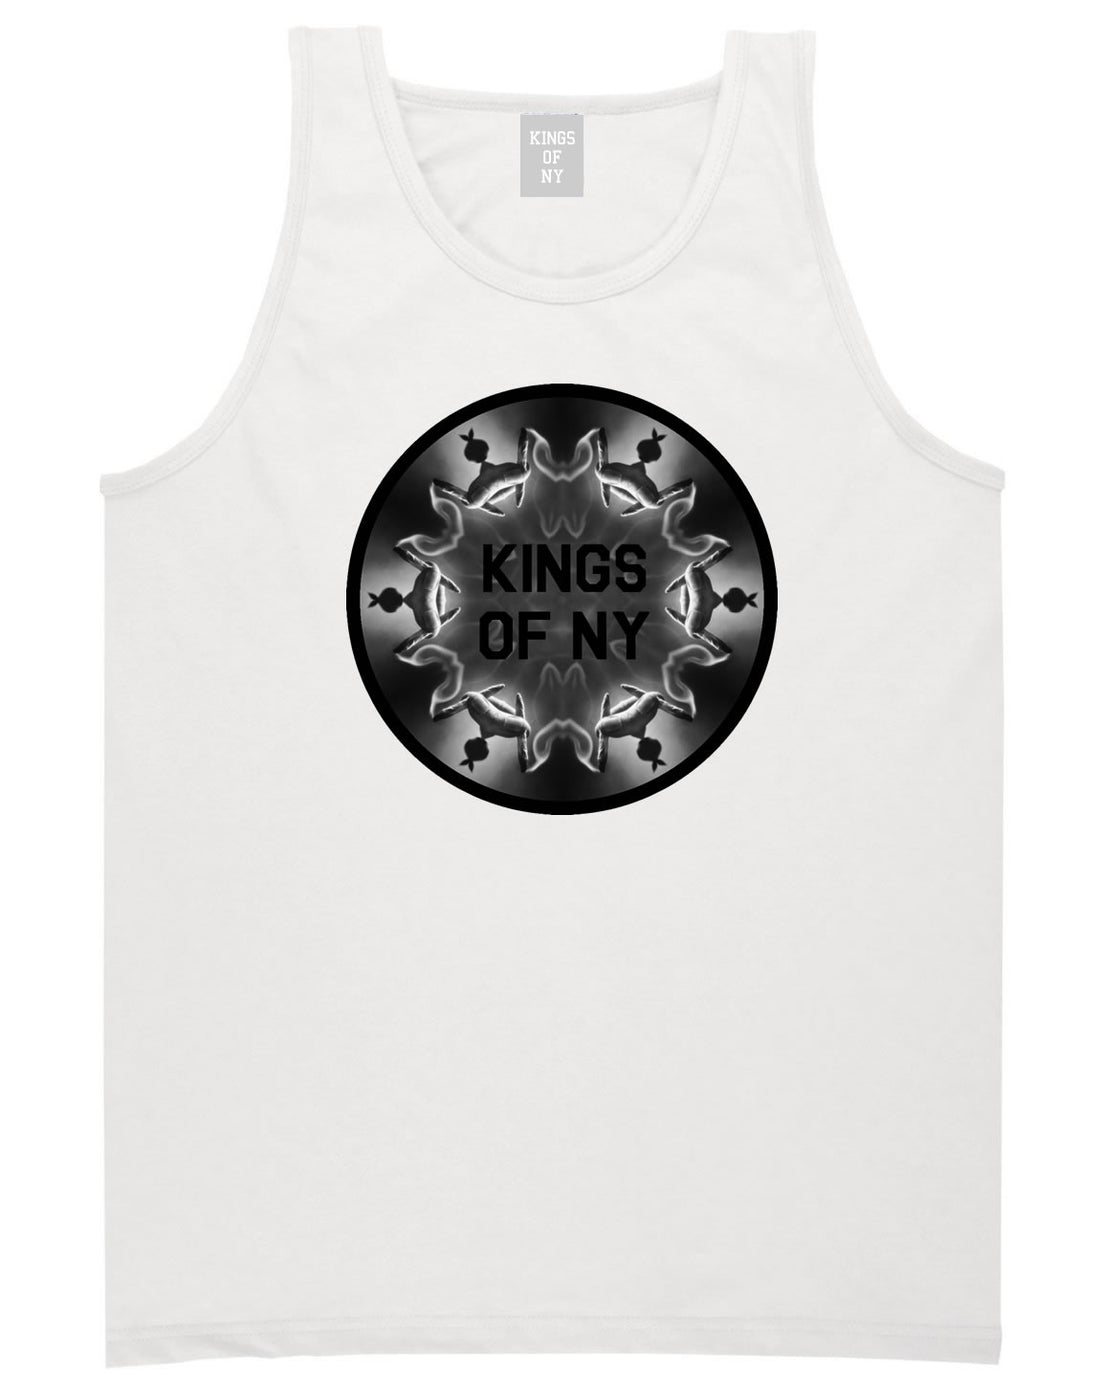 Pass That Blunt Tank Top in White By Kings Of NY